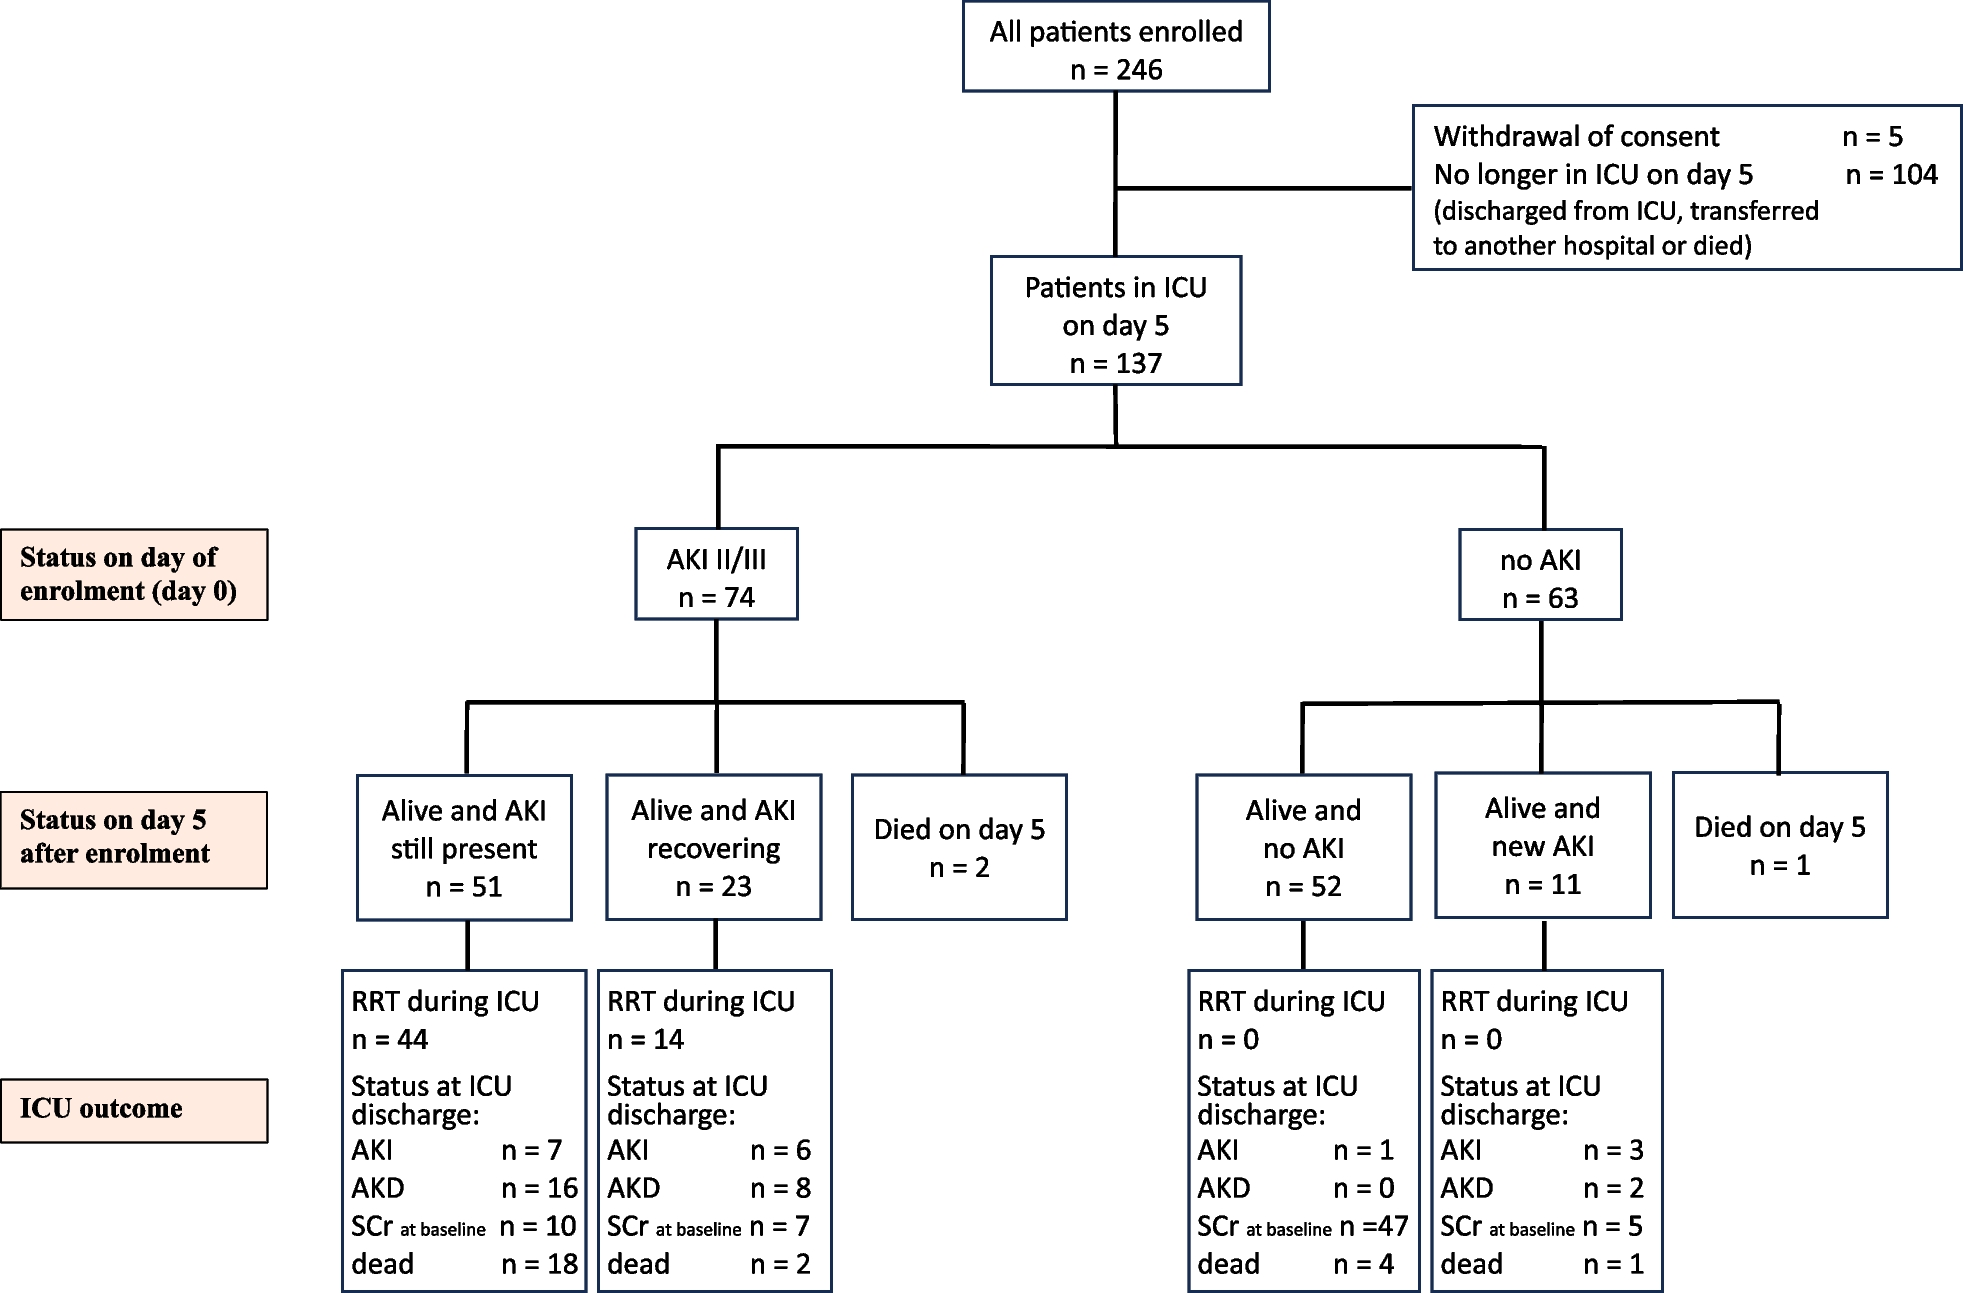 Vitamin D metabolism in critically ill patients with acute kidney injury: a prospective observational study